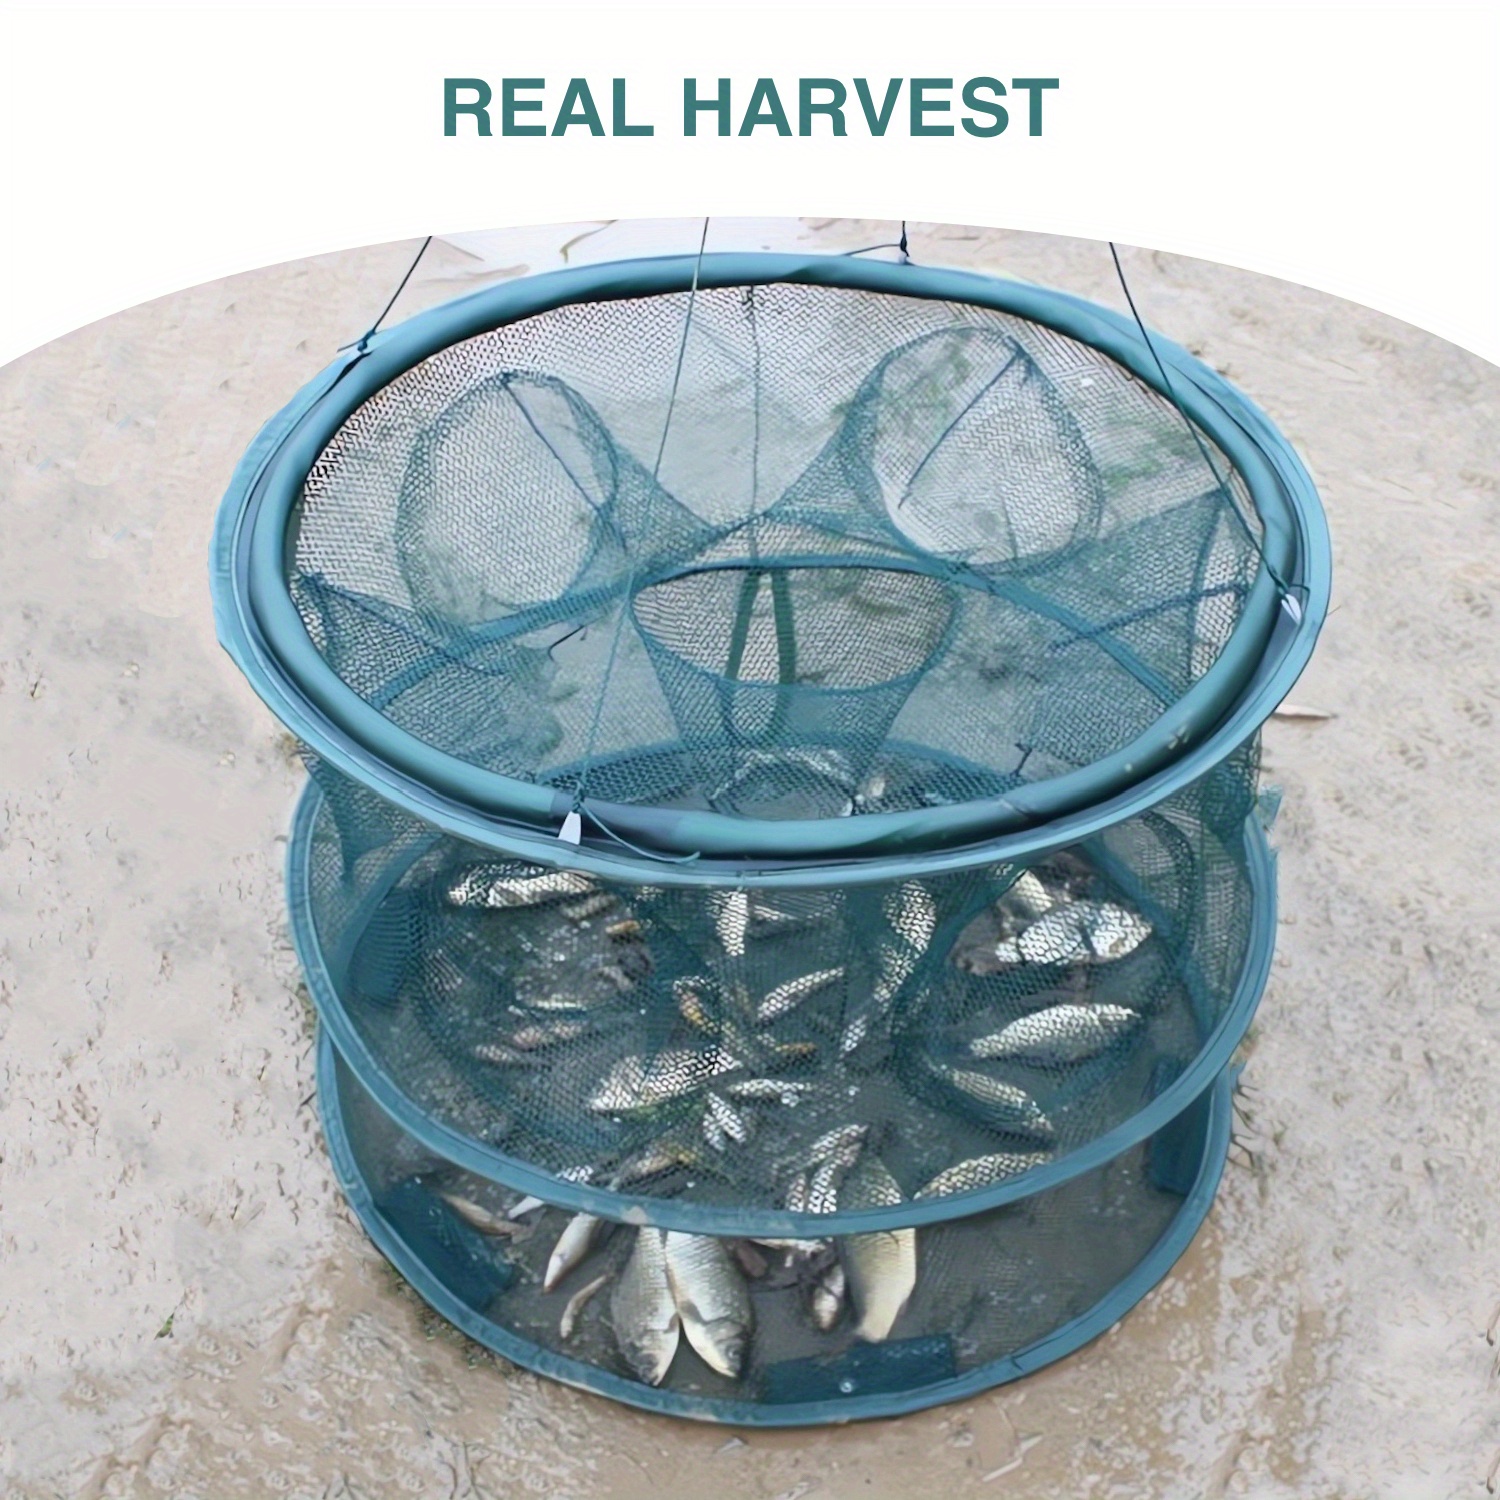  Drasry Fishing Bait Trap Foldable Fish Minnow Crab Crayfish  Crawdad Shrimp Net Trap Cast Net Dip Cage Collapsible Easy Use Hexagon 6 8  12 Hole Fishing Accessories